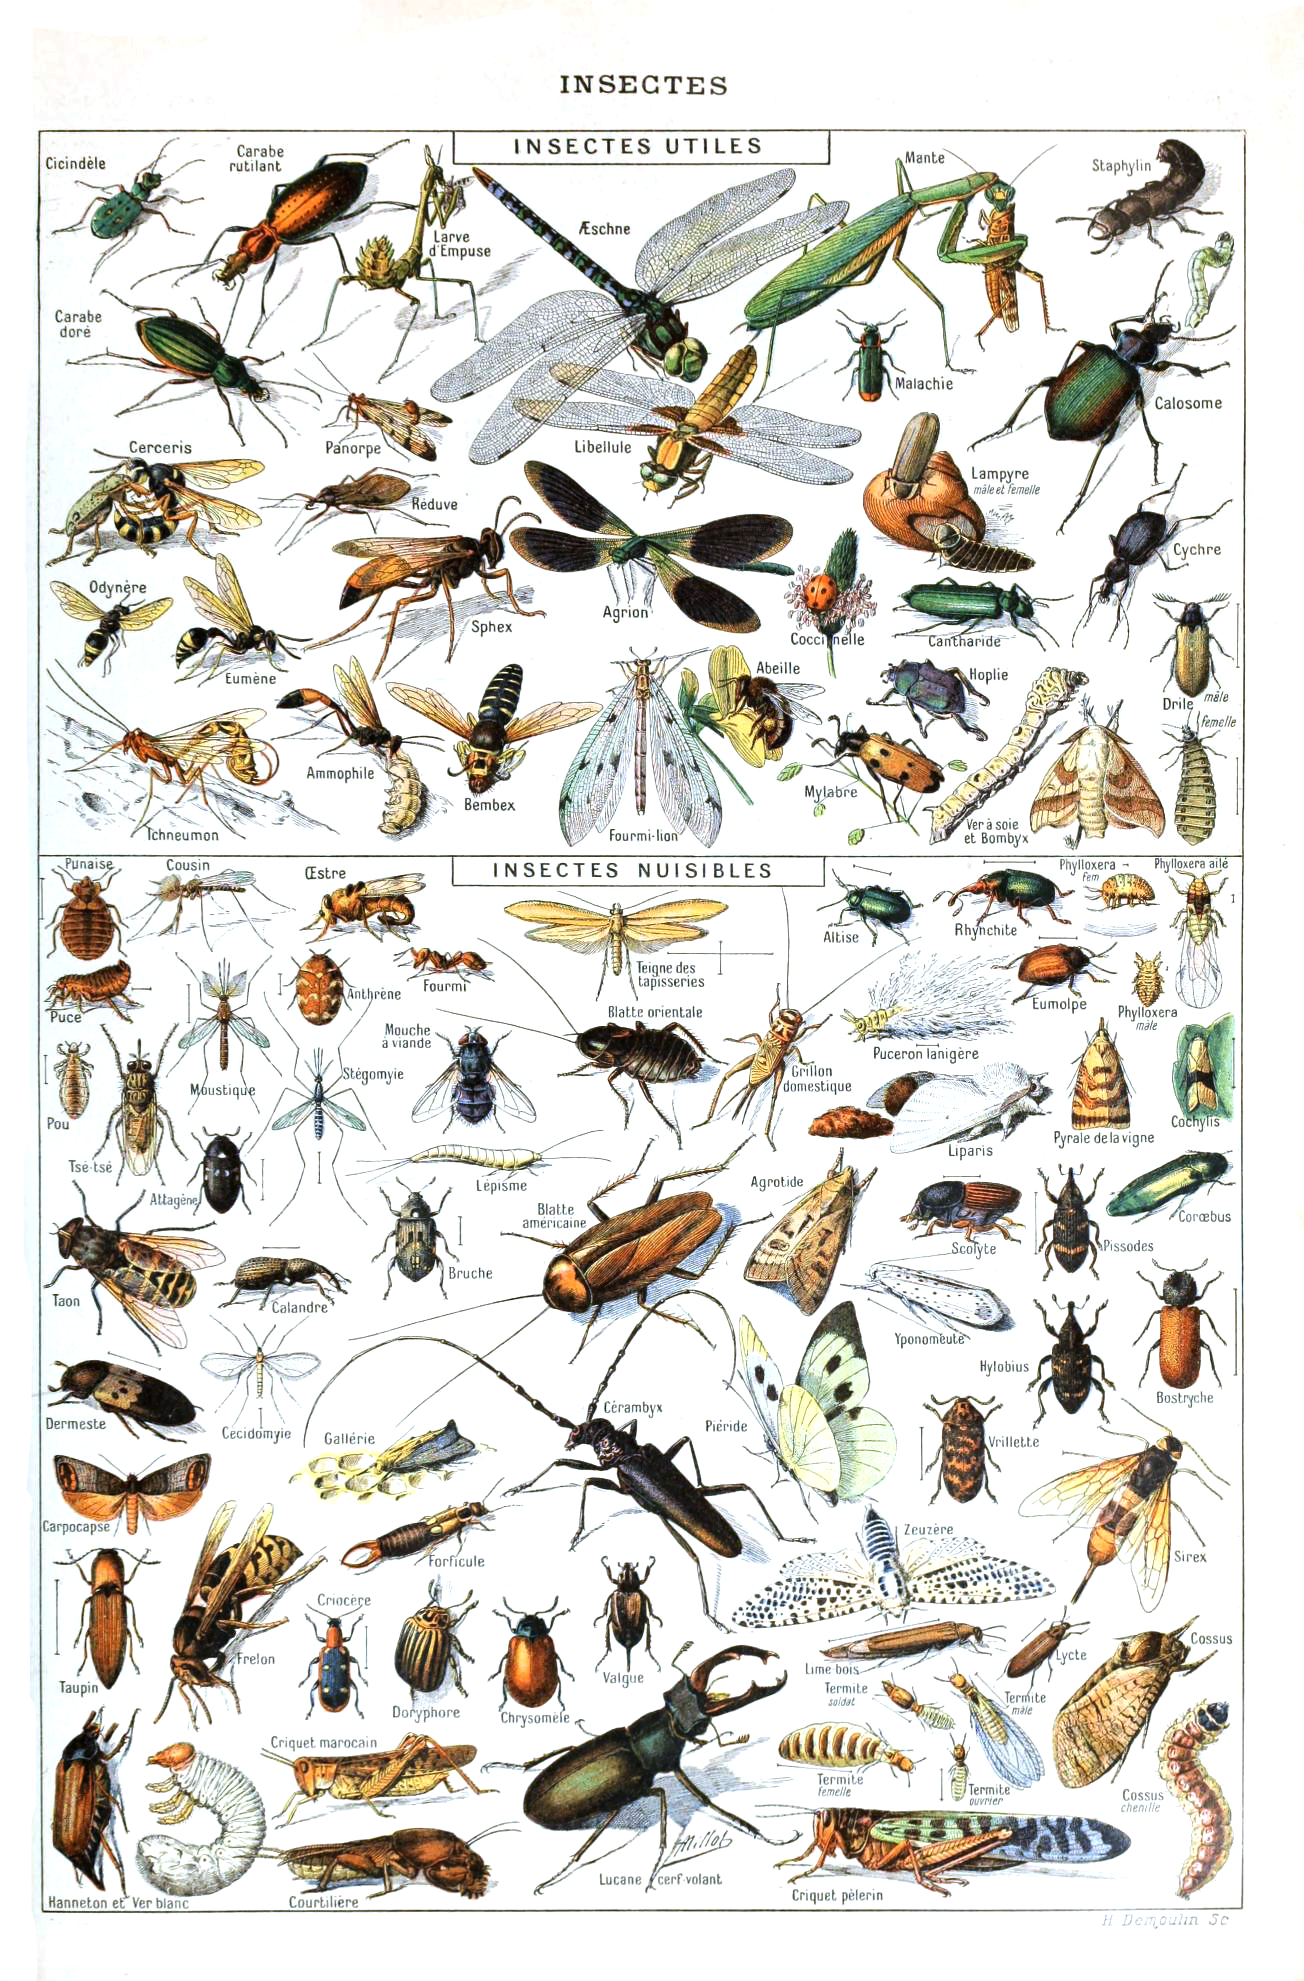 Insects For Sale - OdditiesBizarre.com